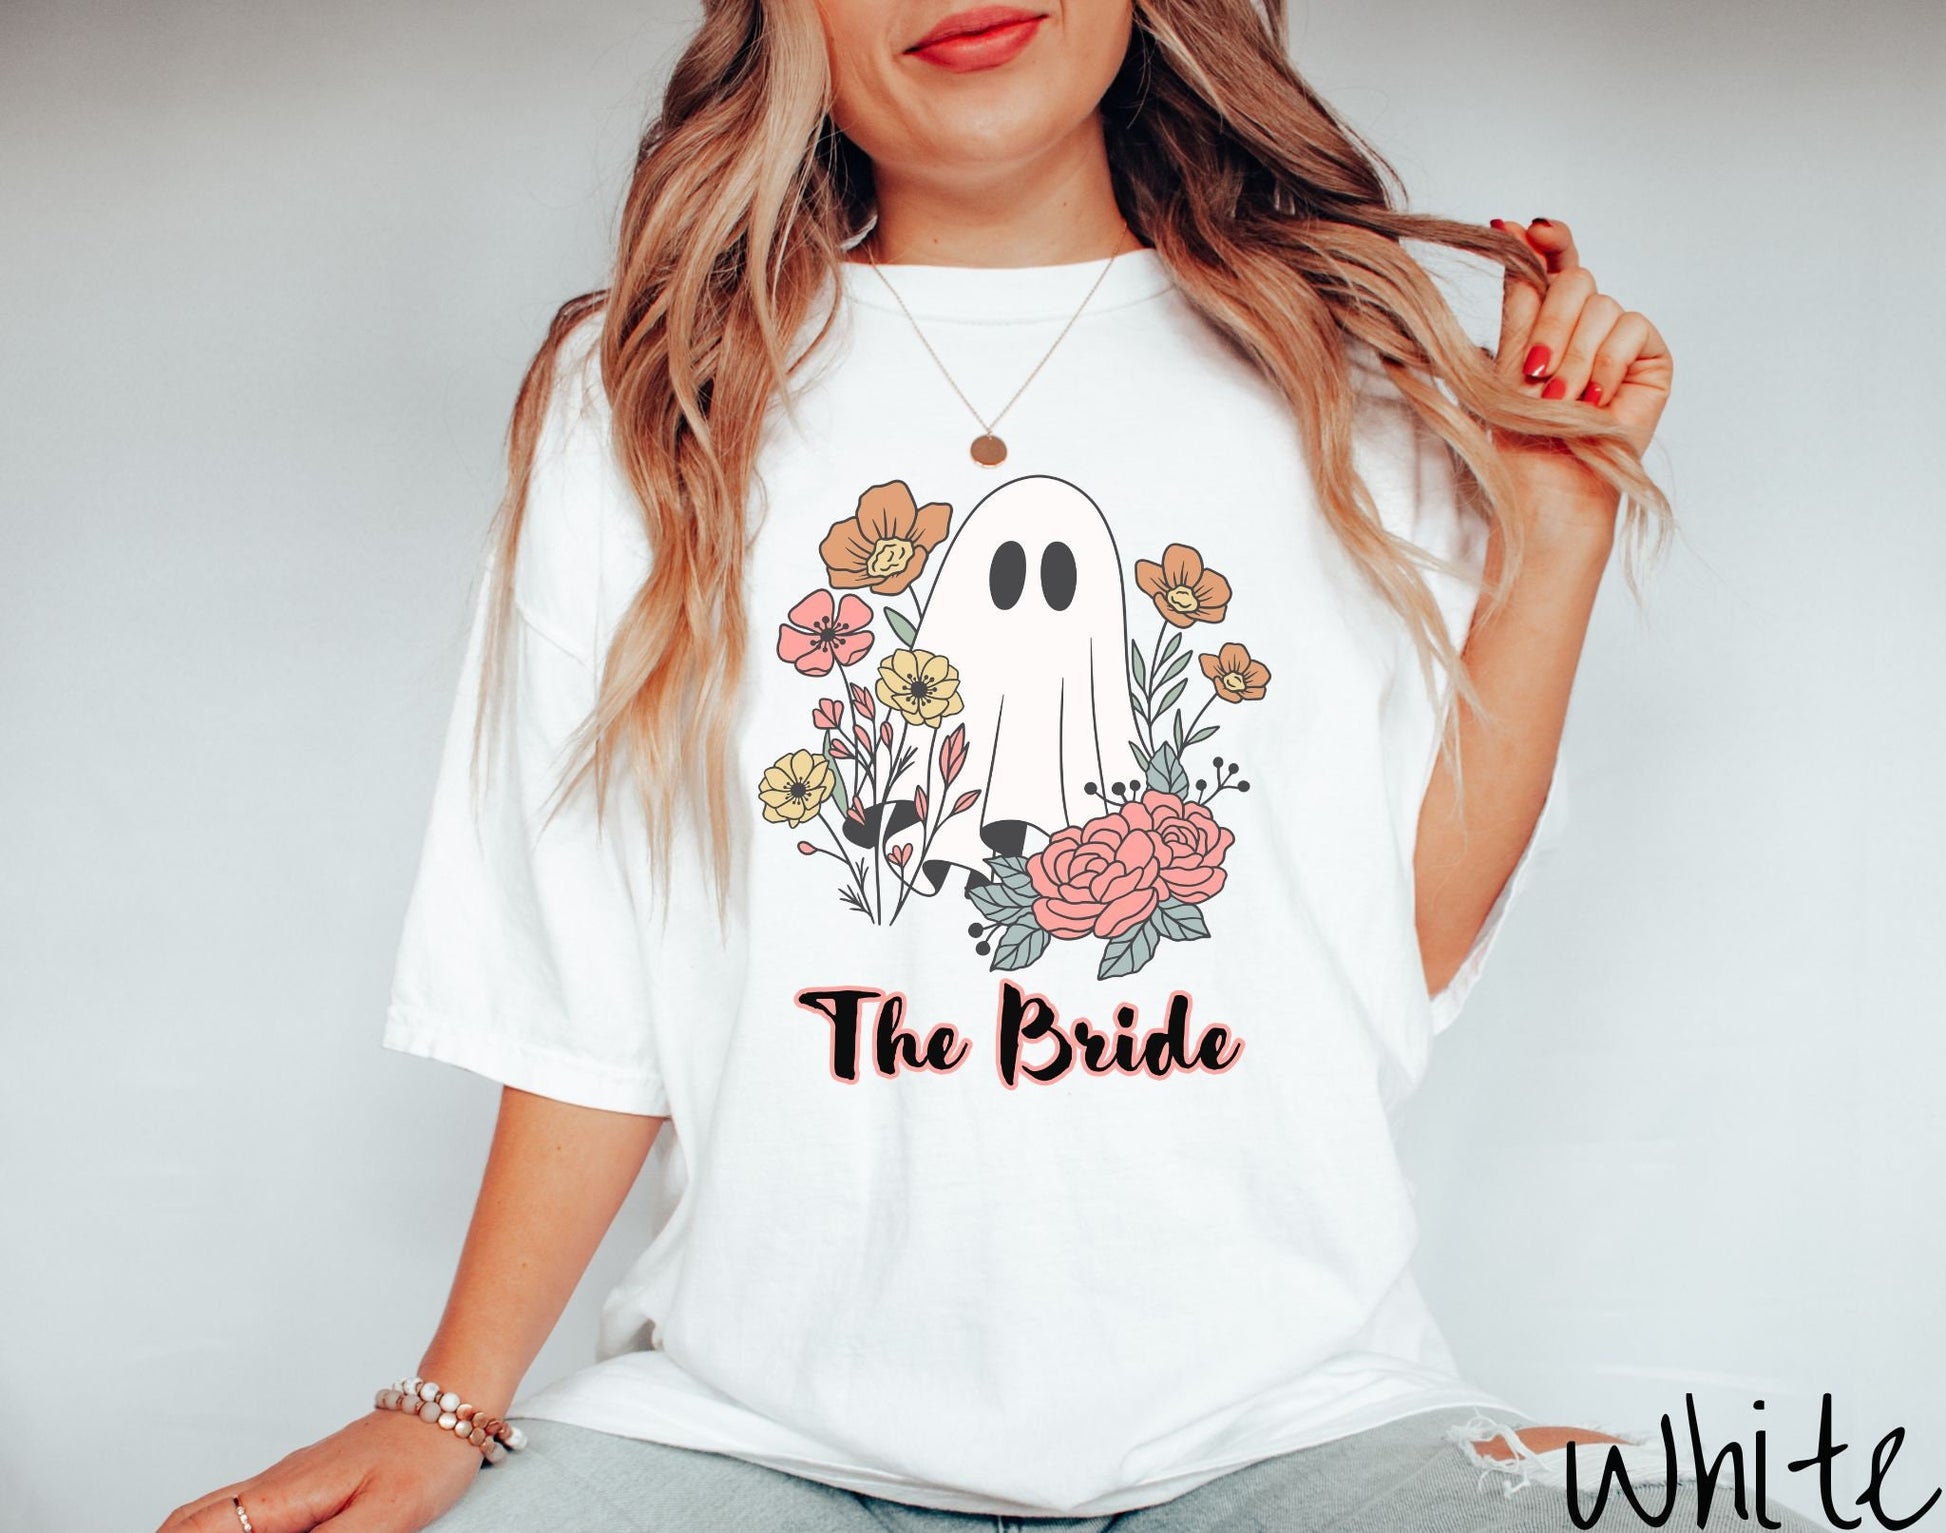 A woman wearing a cute white colored shirt with the text Boo Crew under a ghost figure holding a camera.